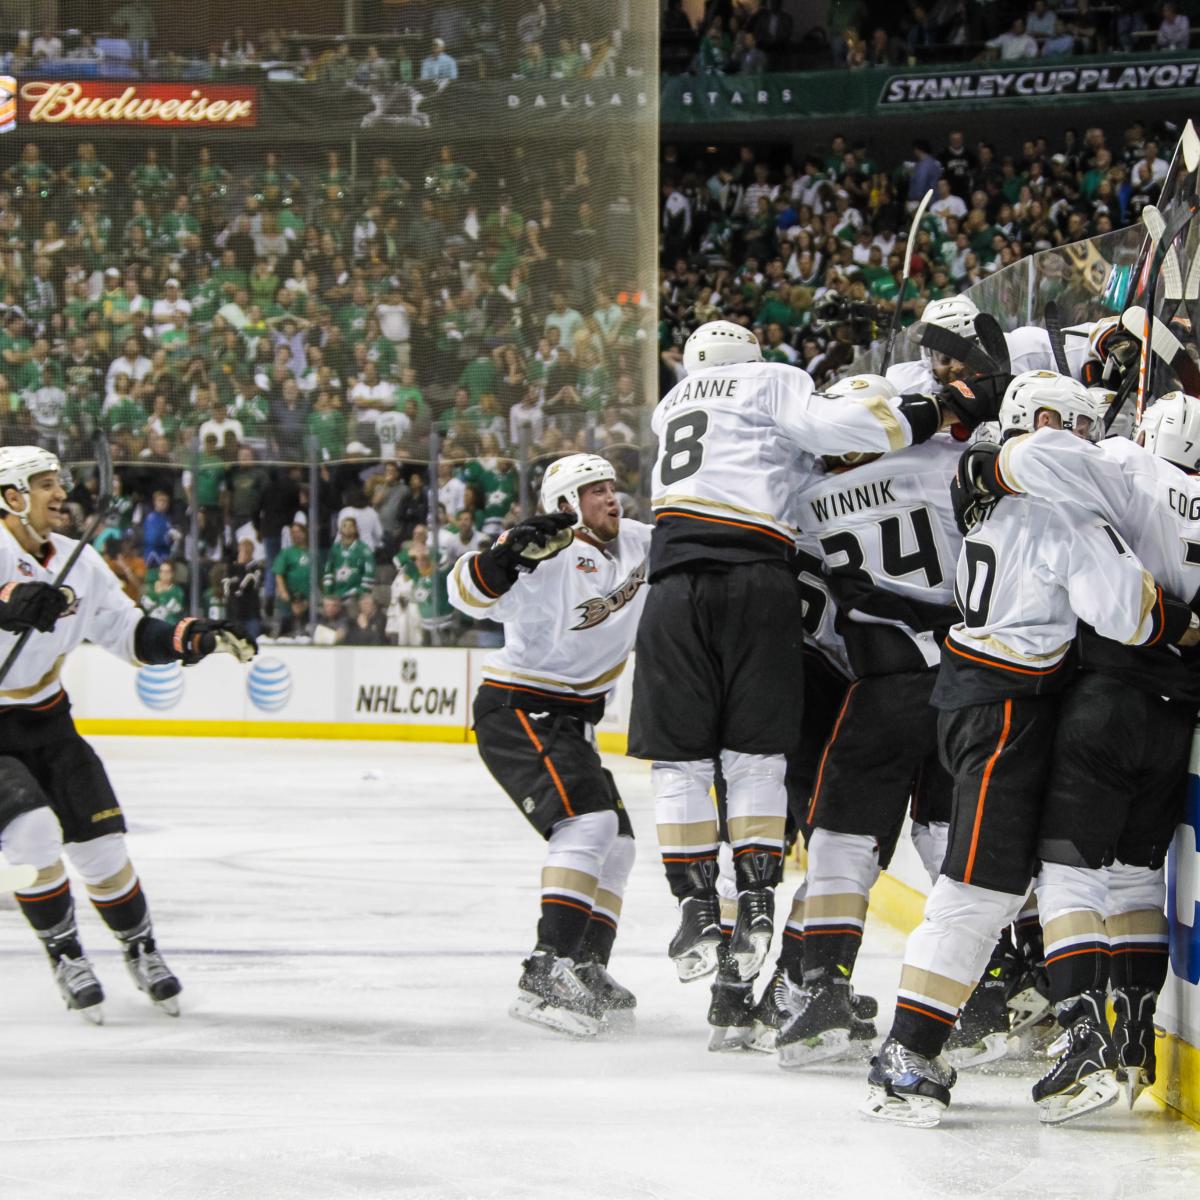 NHL Playoff Schedule 2014: Round 2 Dates, Game Times and TV Coverage